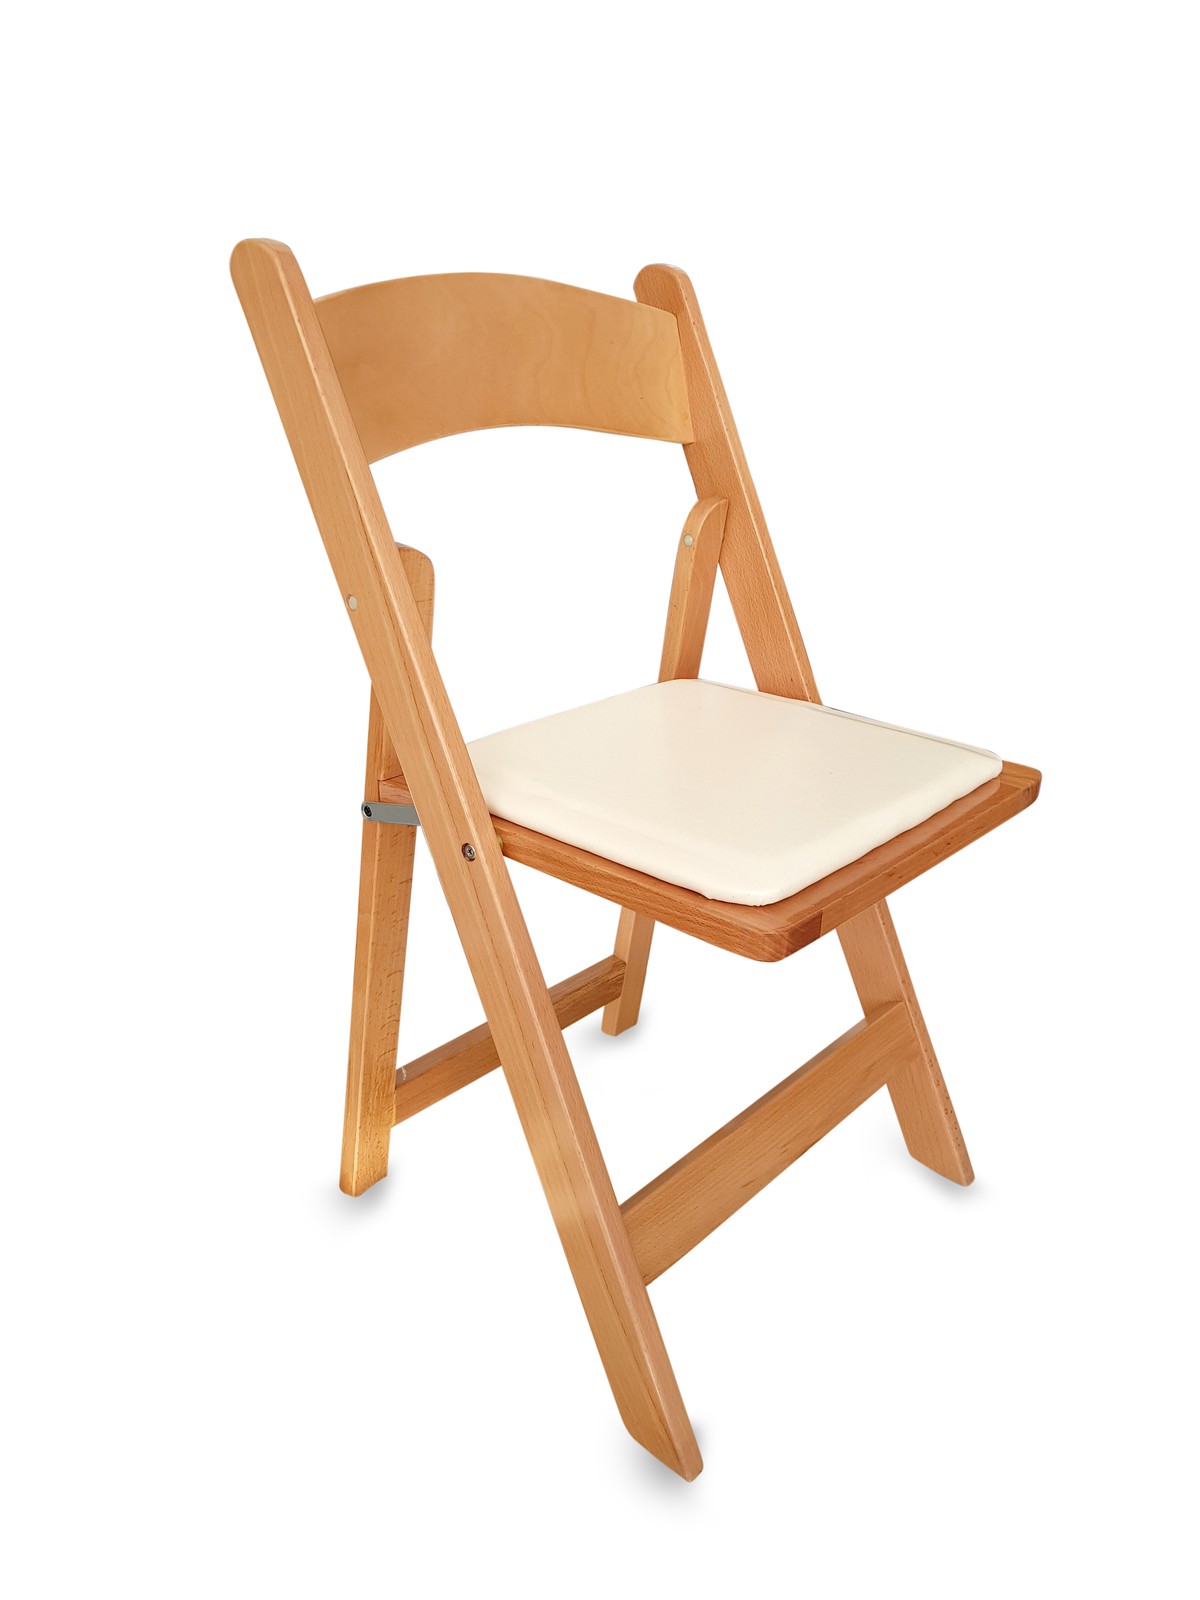 Folding Wooden Chairs With Padded Seats : Check out our padded folding